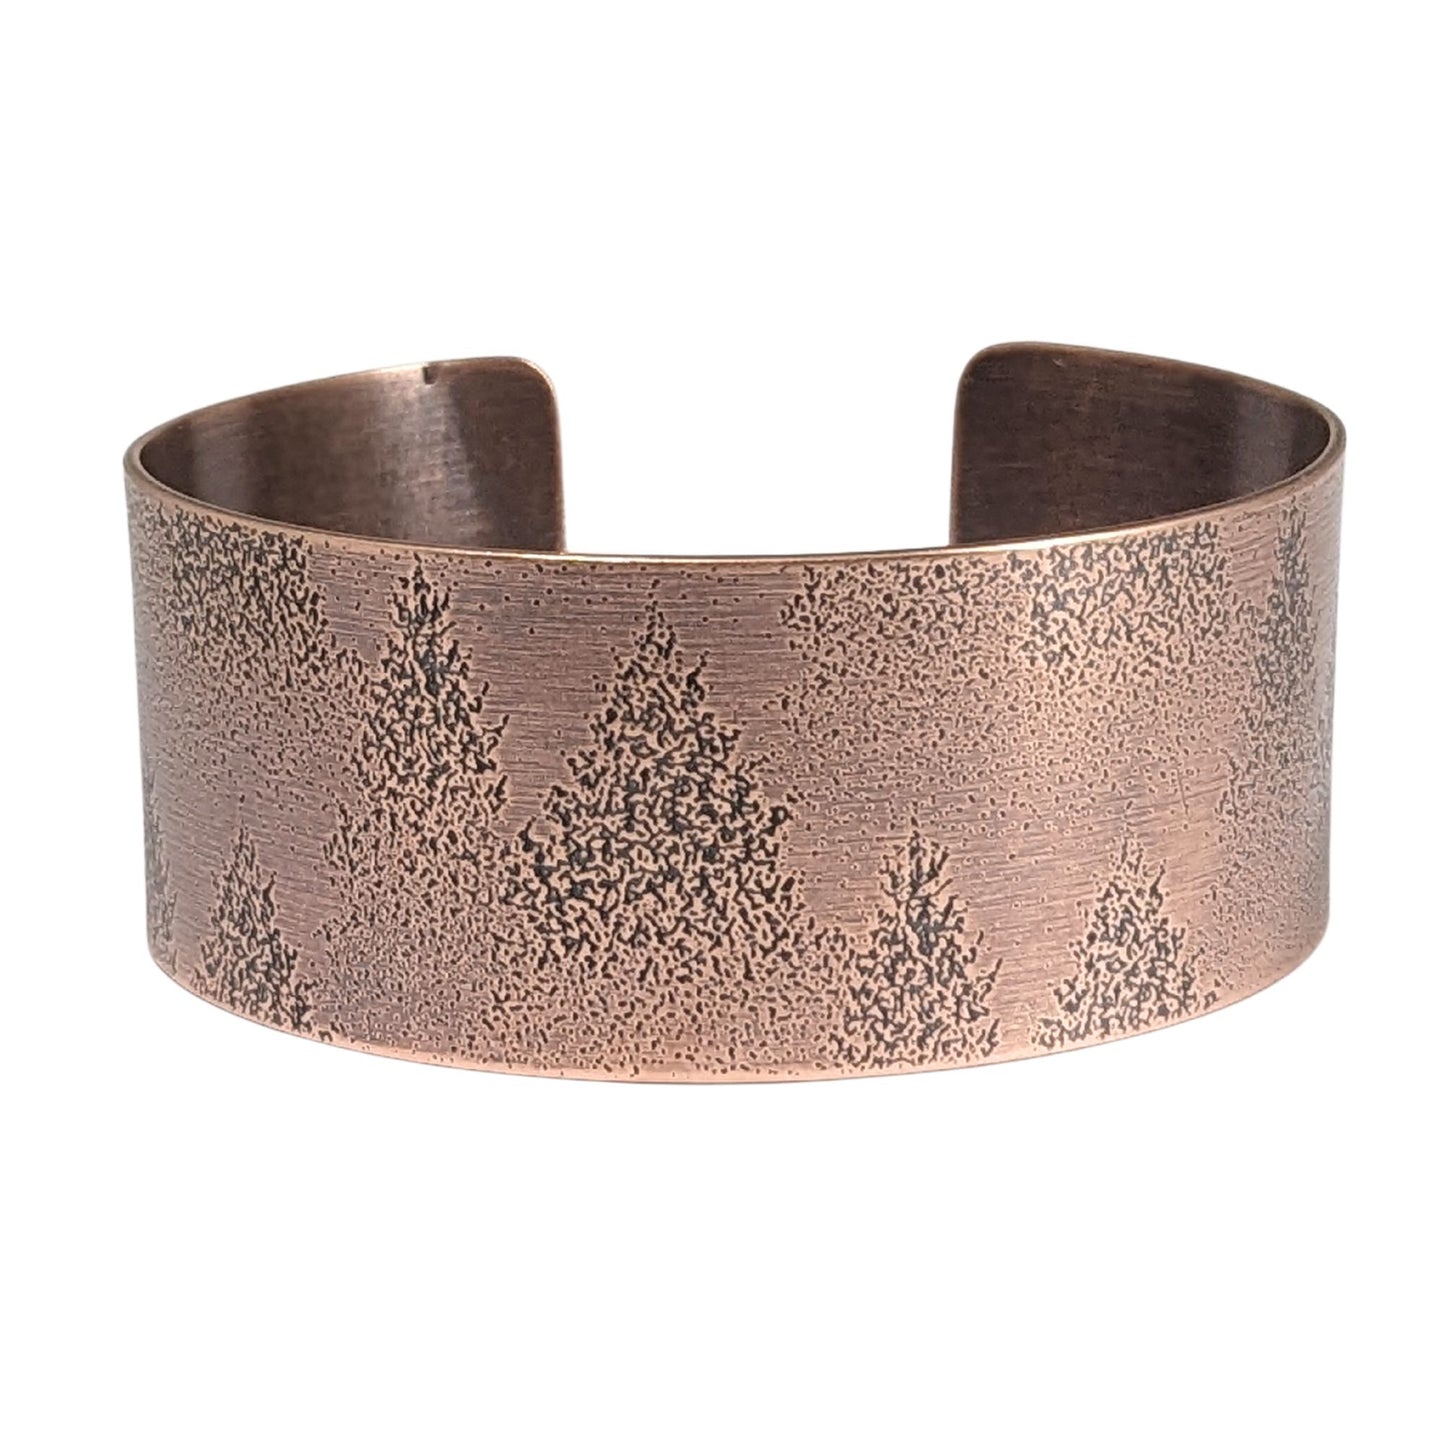 A copper cuff bracelet with an impressed design of fir tree evergreens in snow.